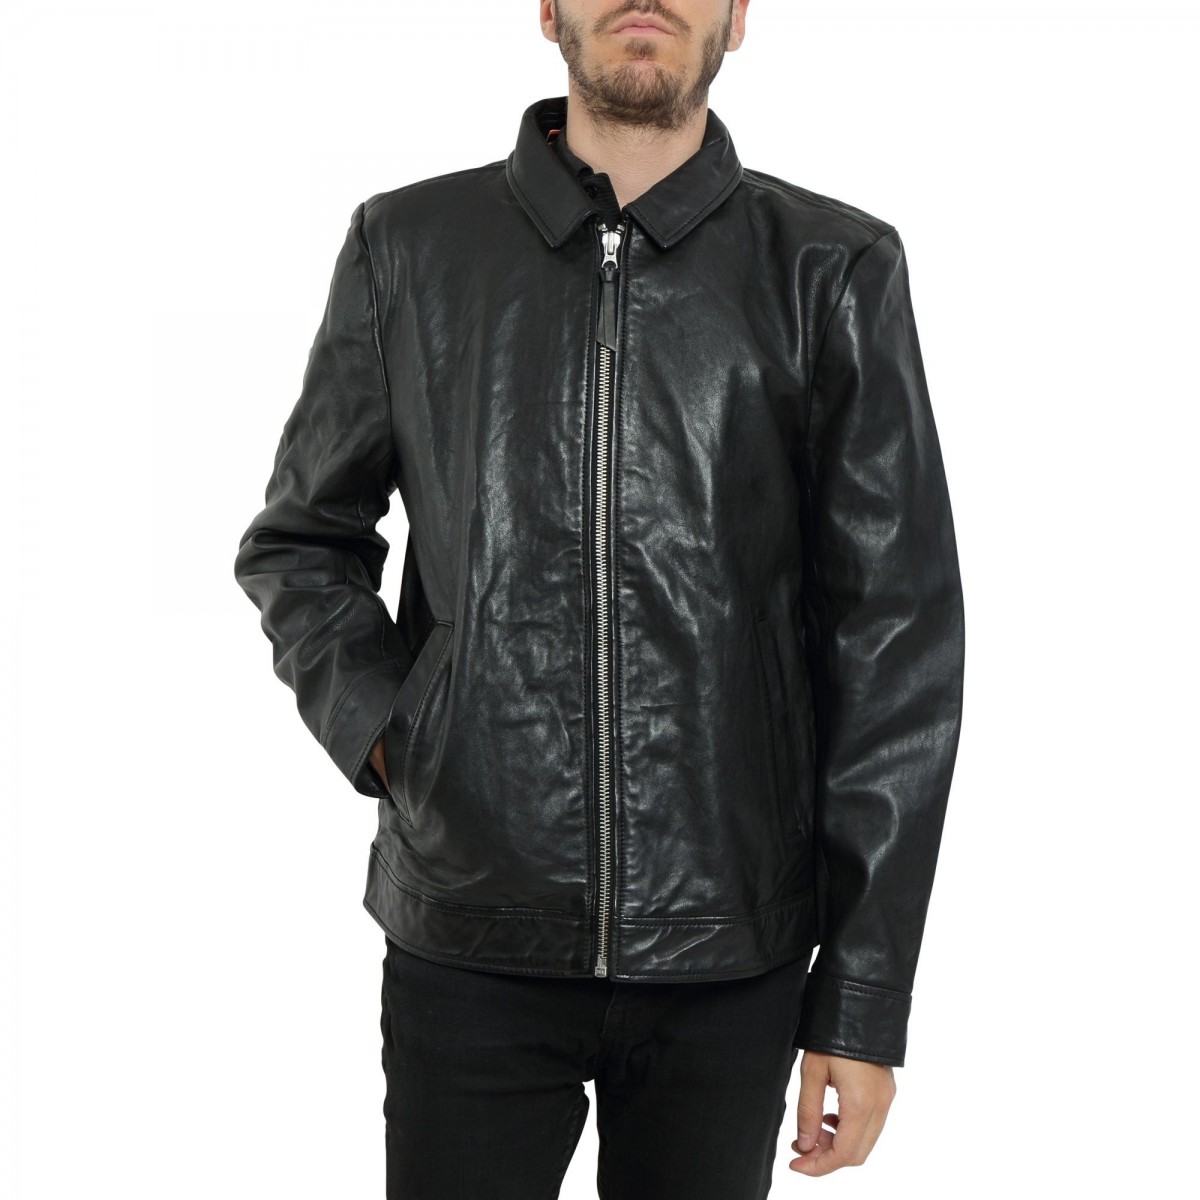 INDIE COACH LEATHER JACKET